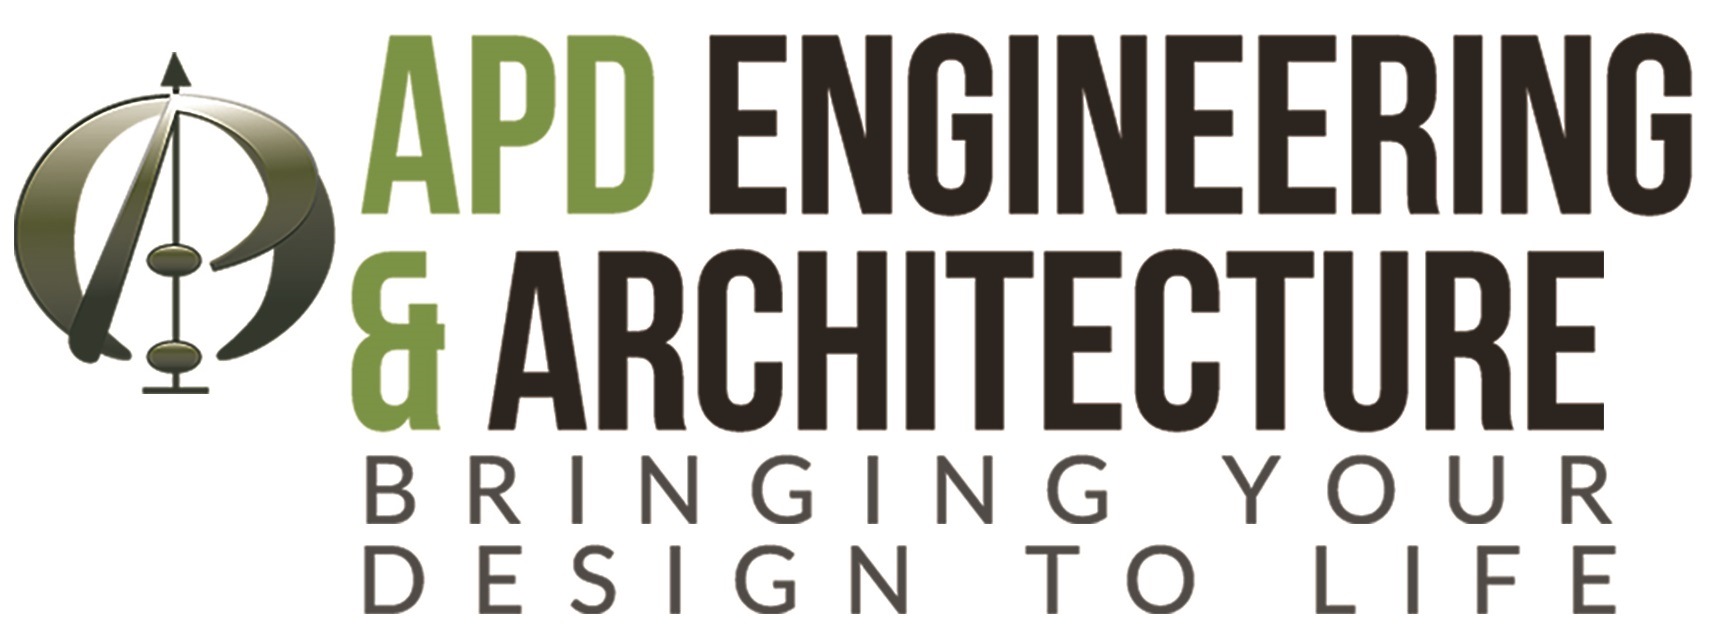 APD Engineering and Architecture